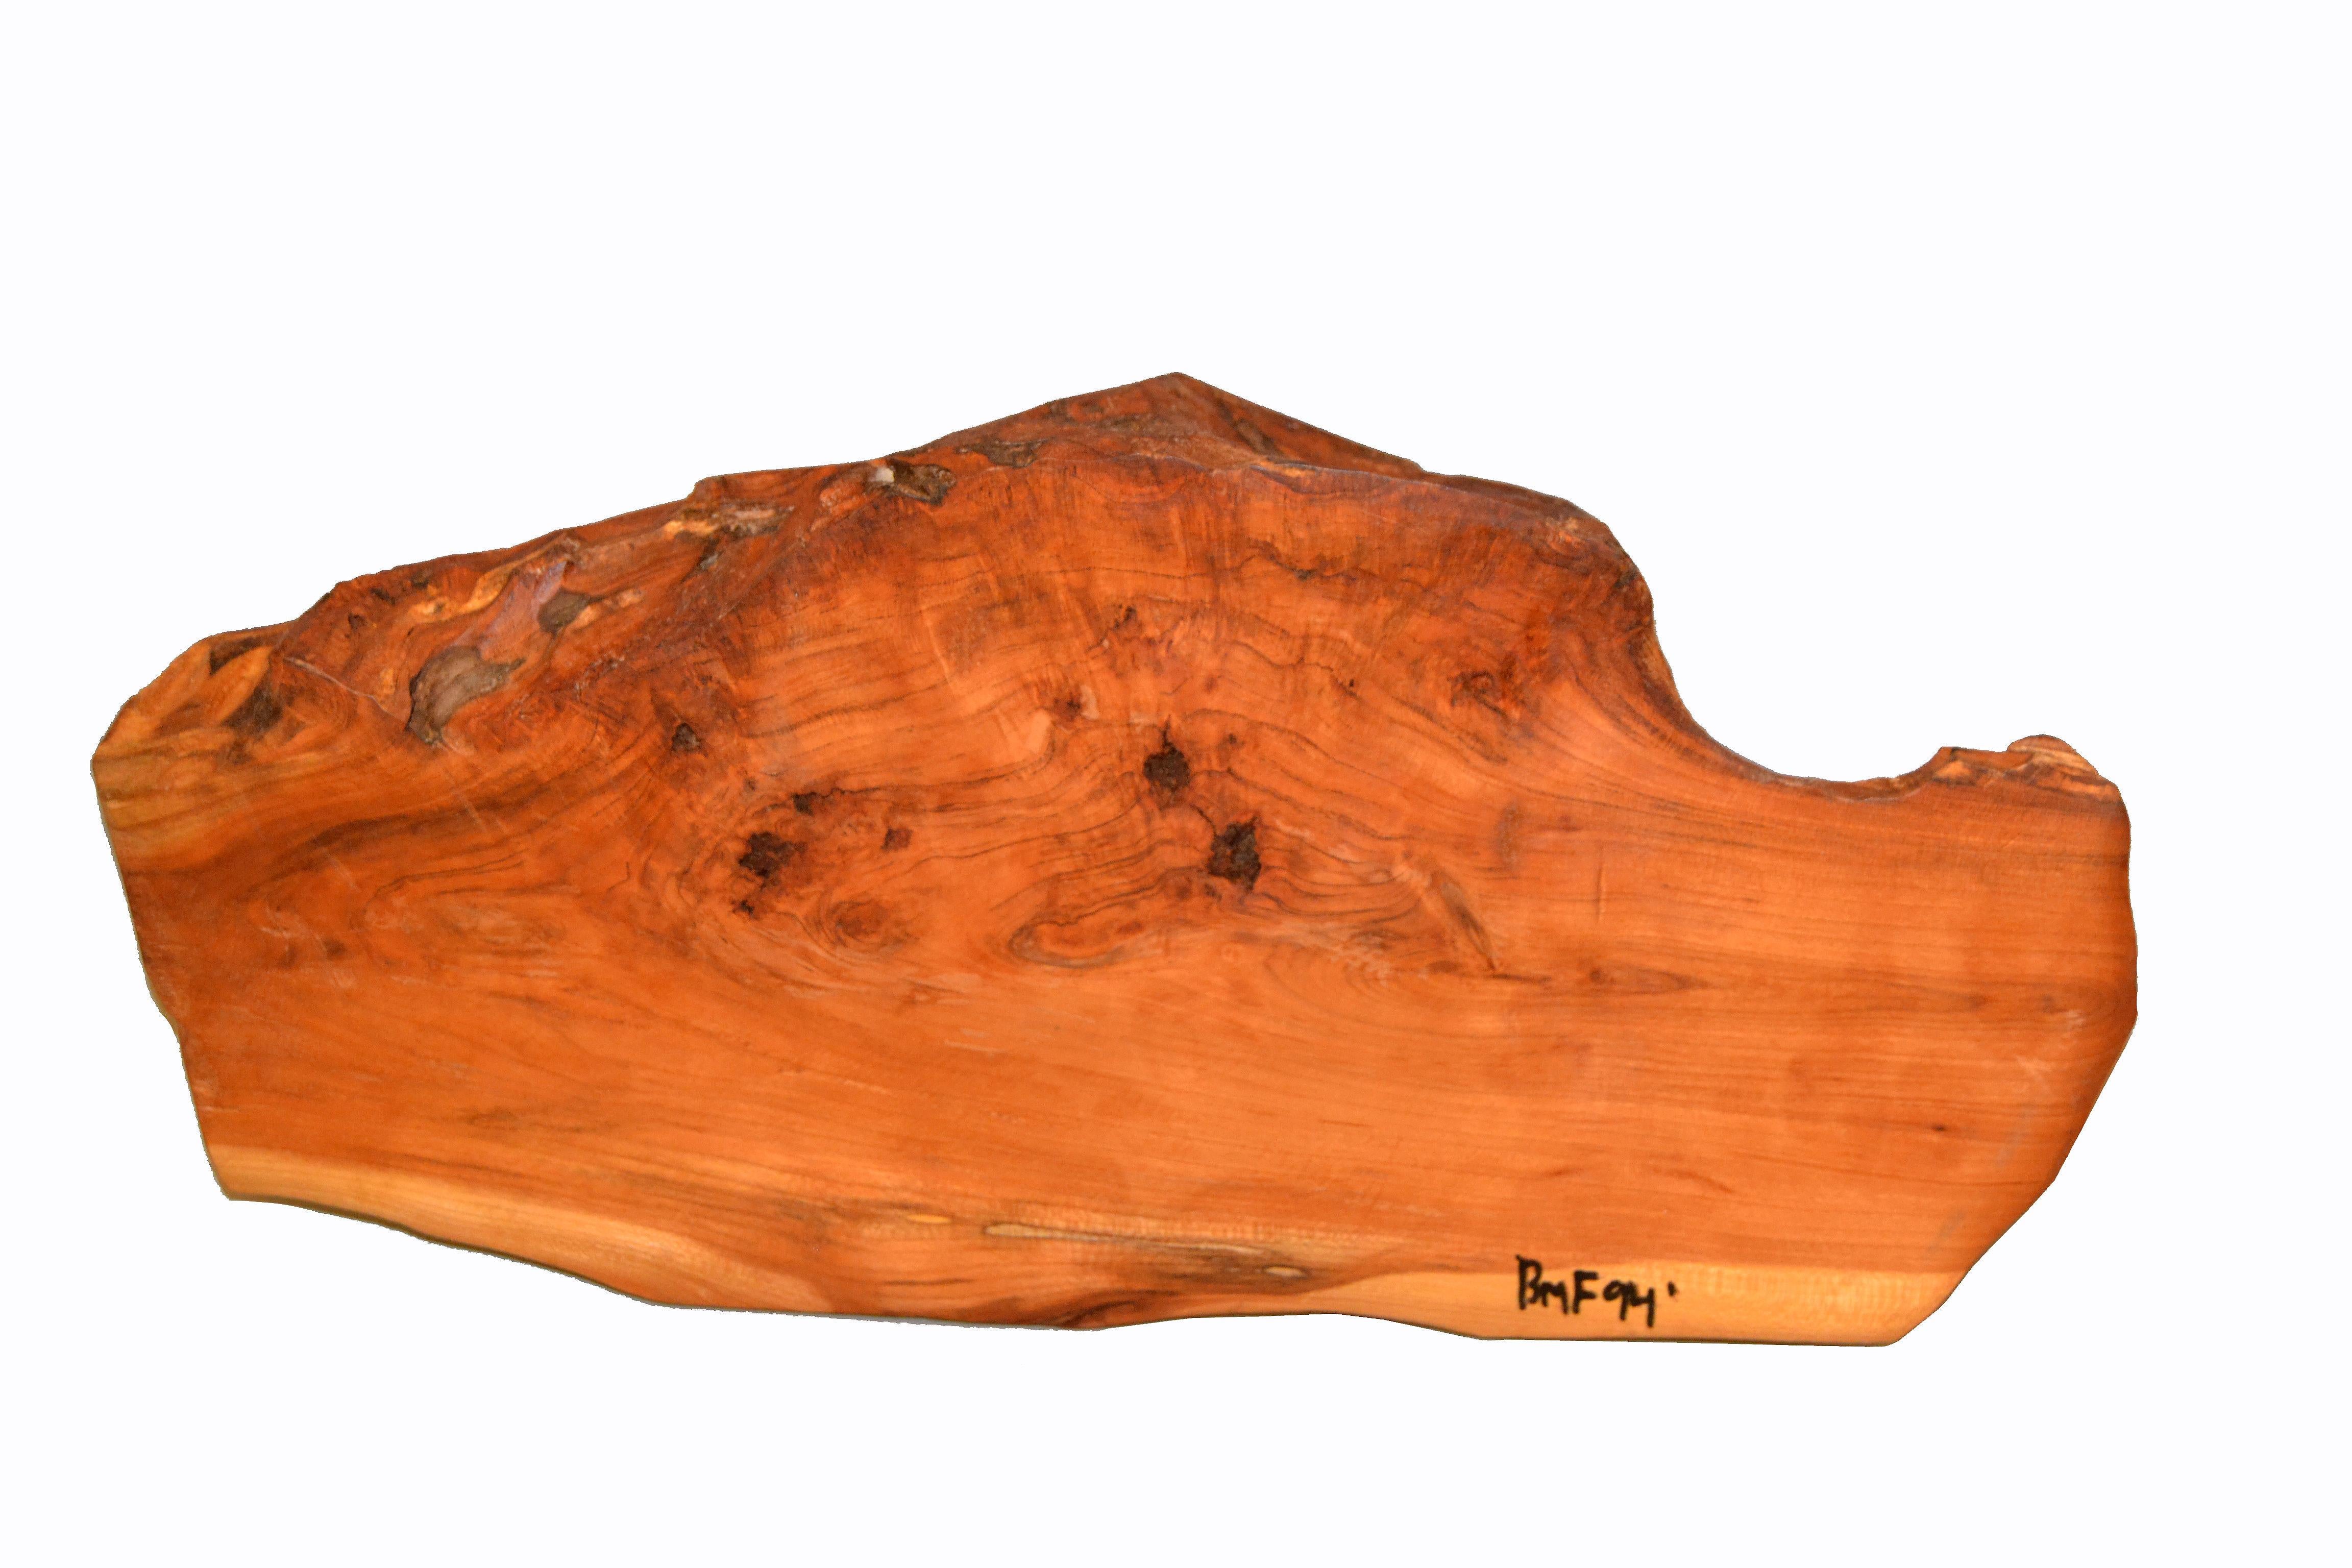 American Organic Modern Handcrafted Hardwood Decorative Serving Tray Centerpiece For Sale 6